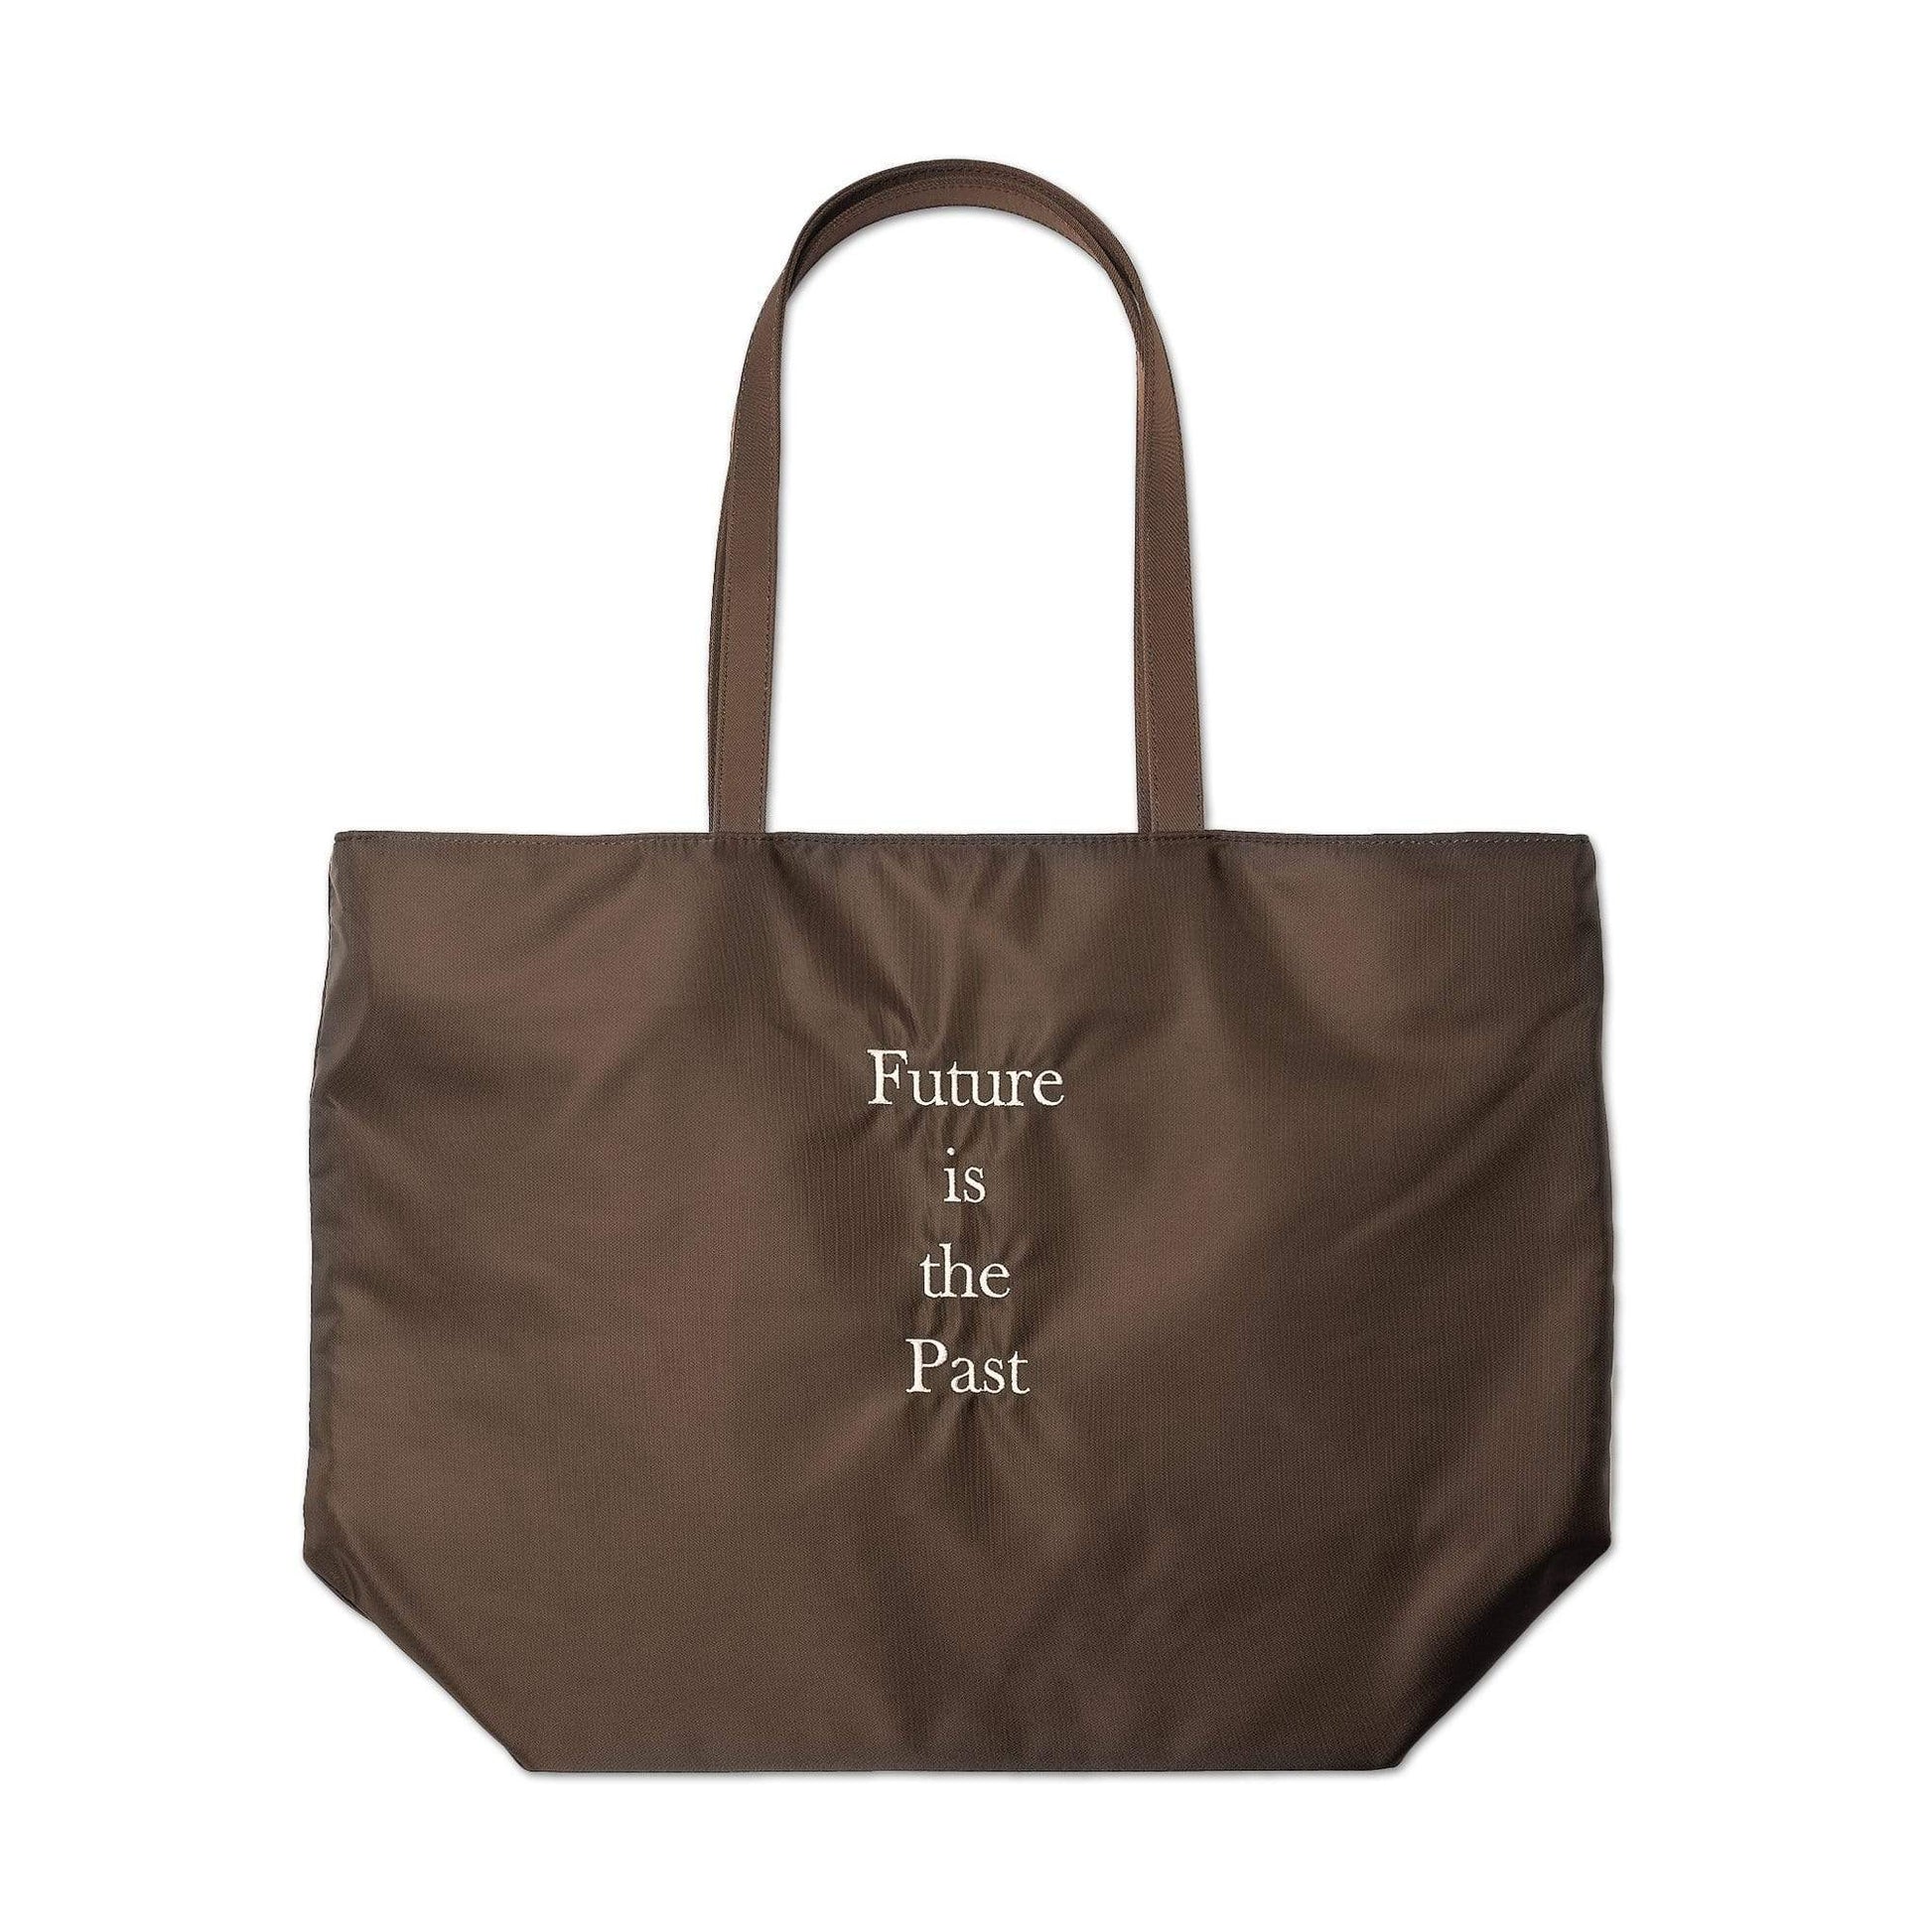 undercover future is the past tote bag (dark brown) - ucy4b05-3 - a.plus - Image - 1